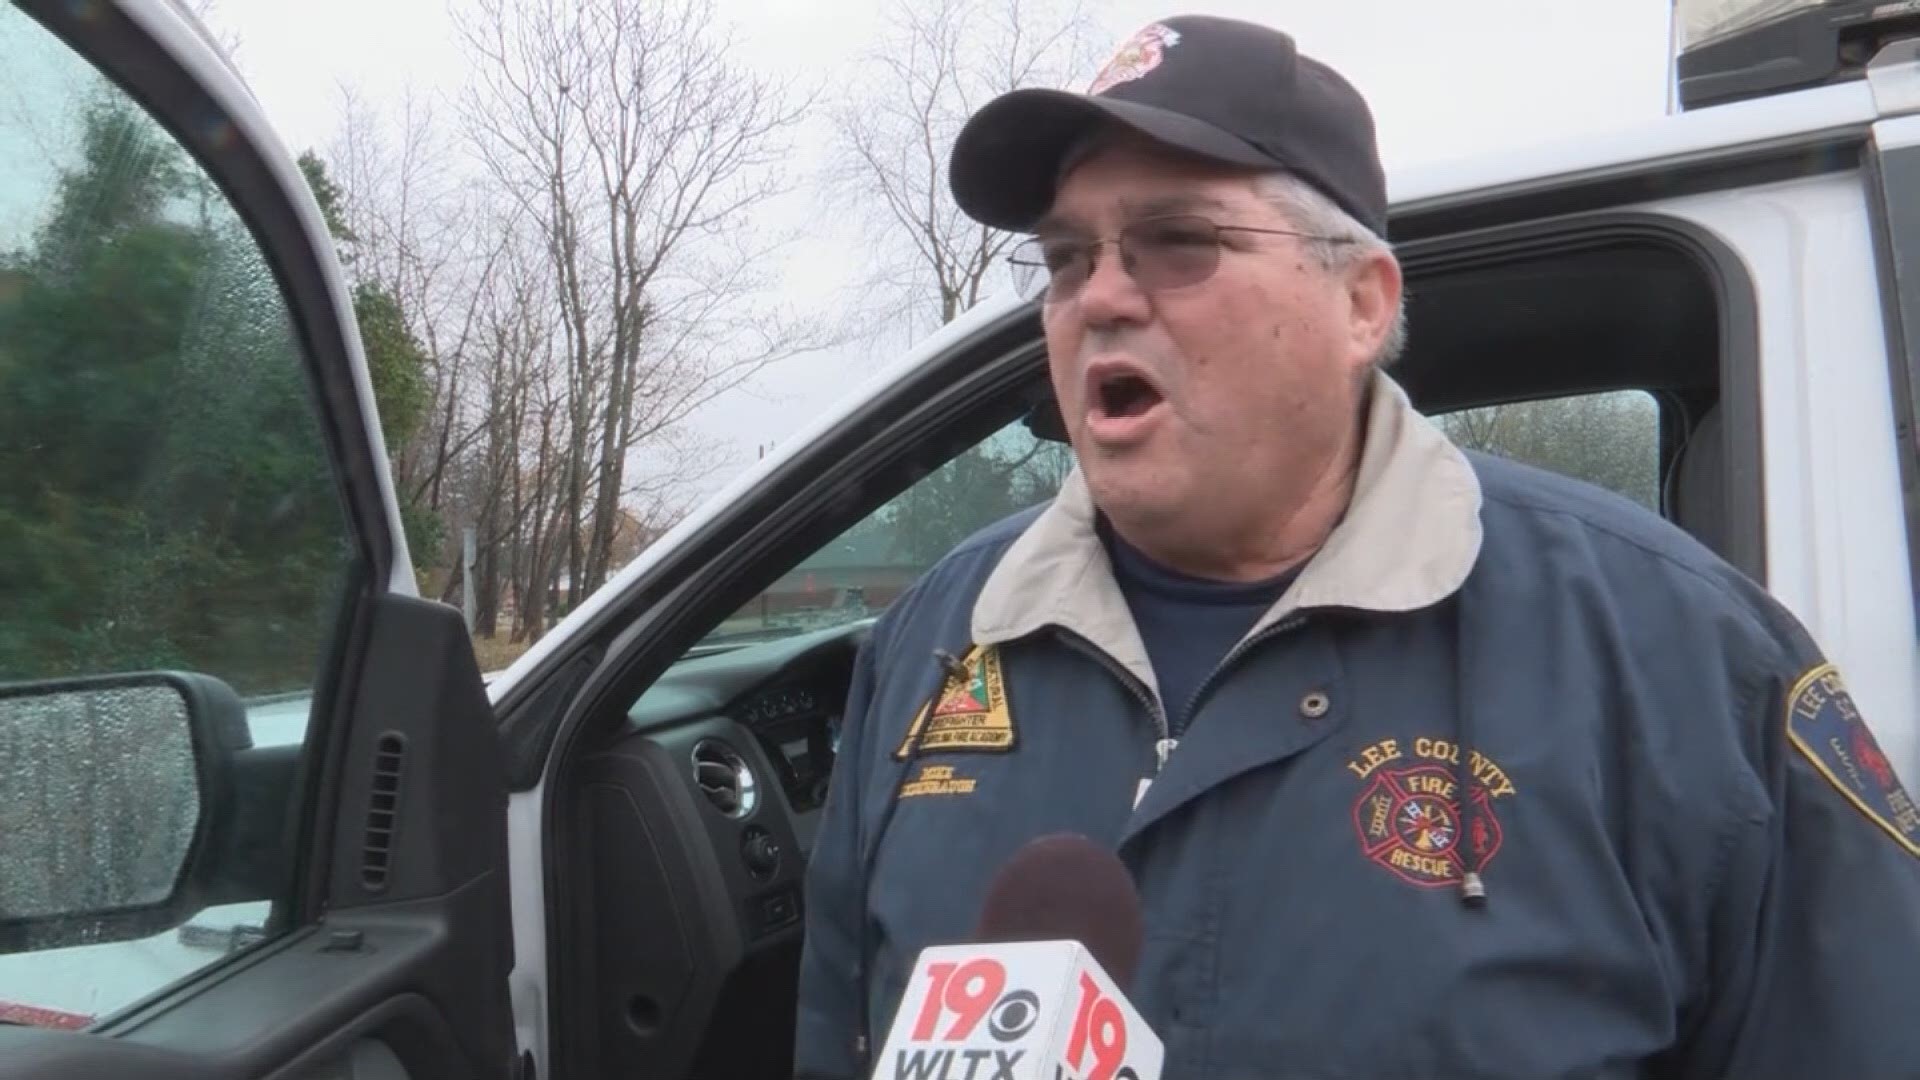 Lee County fire chief Mike Bedenbaugh describes their response to a propane tank leak in Bishopville